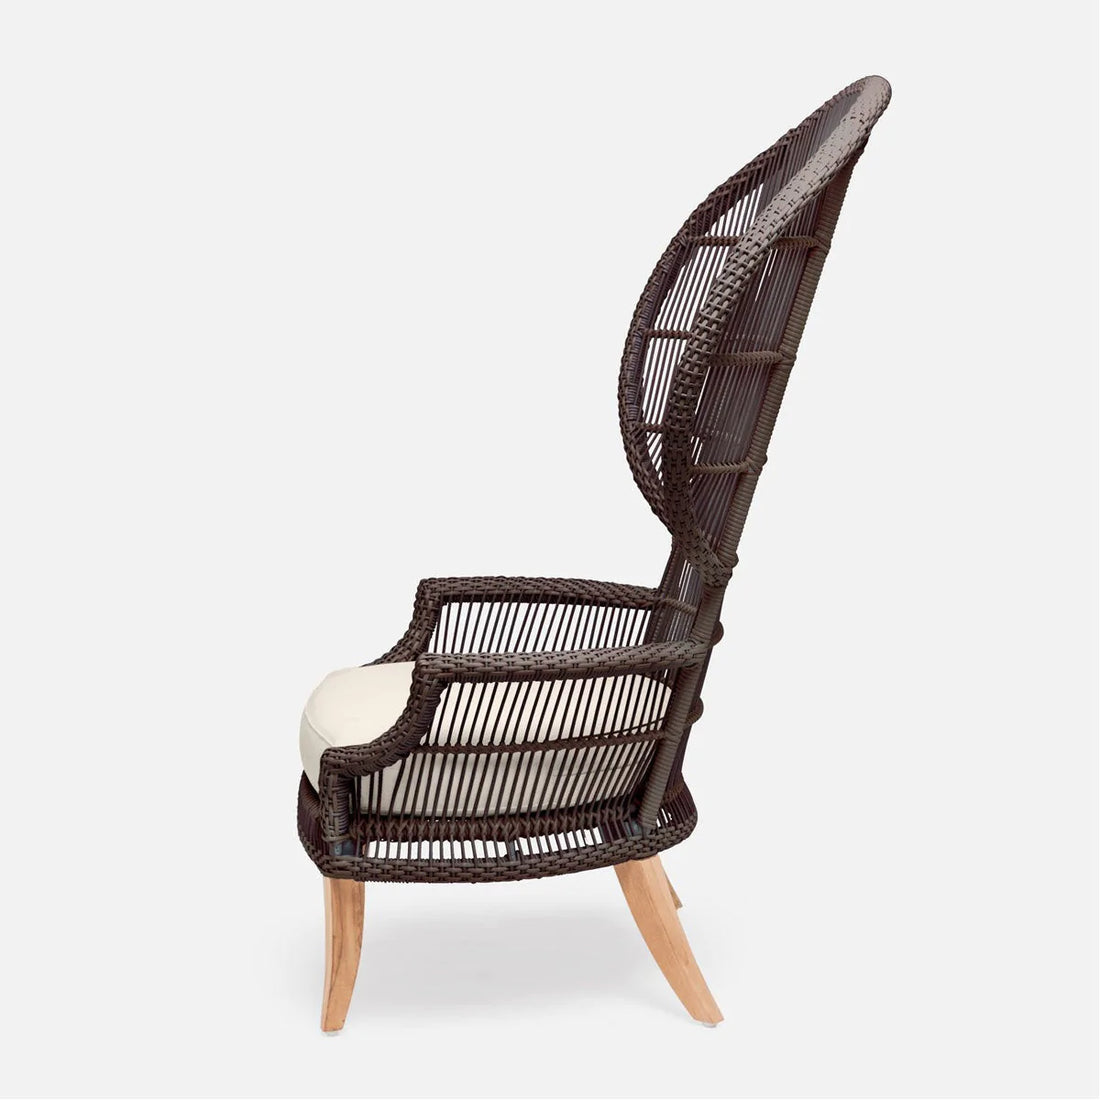 Made Goods Aurora Woven Wingback Outdoor Lounge Chair in Danube Fabric